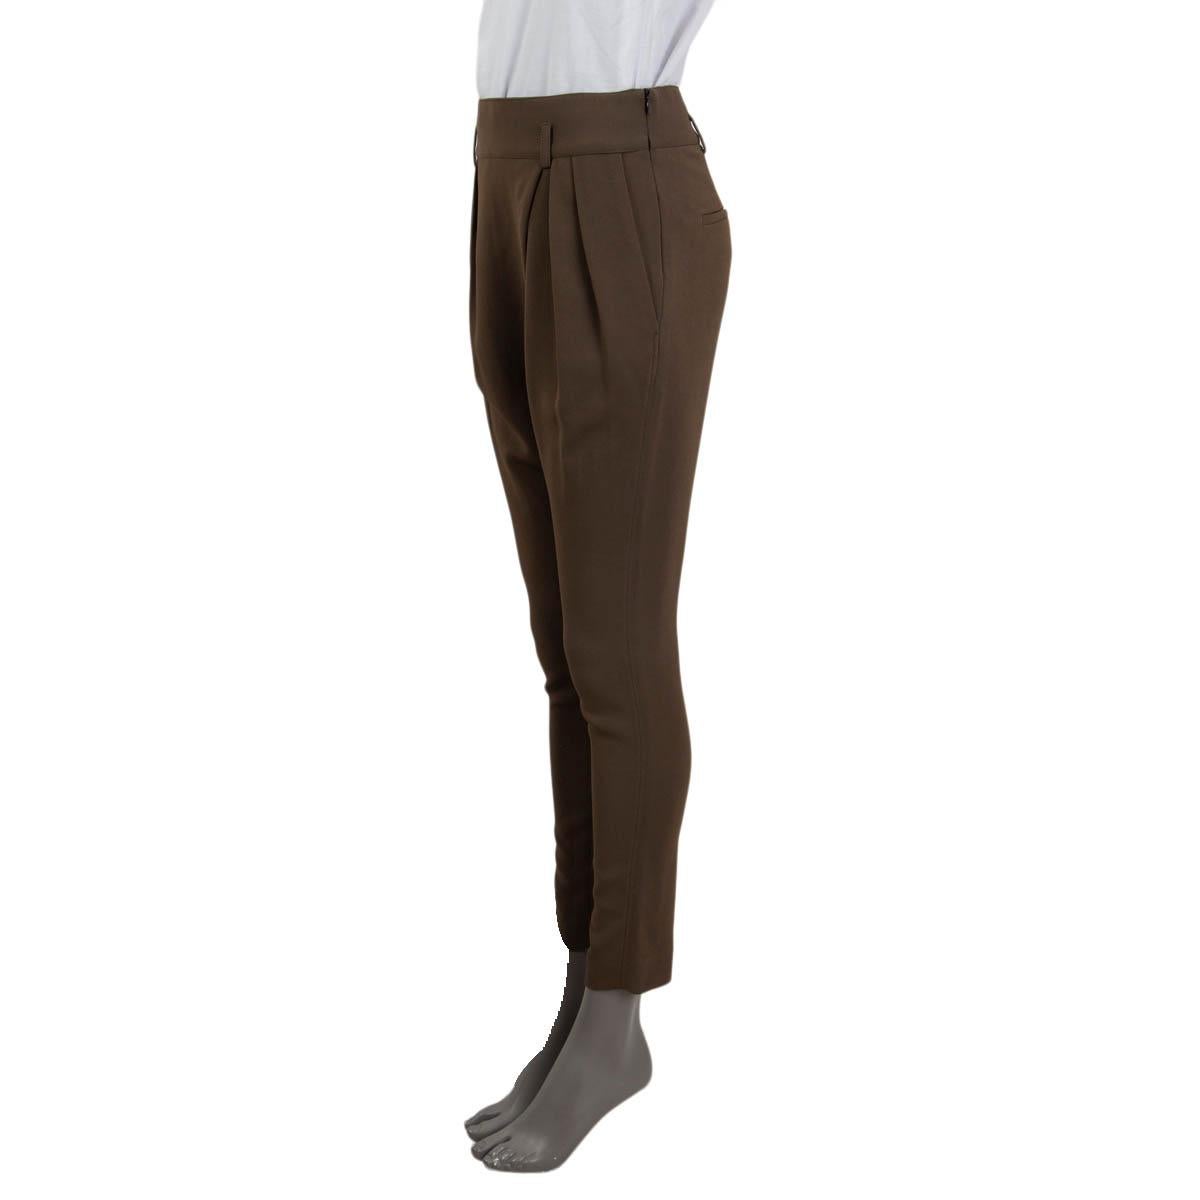 100% authentic Givenchy asymmetrical pleated pants in khaki viscose (95%) and elastane (5%). Feature two slit pockets on the side, two at the back and belt loops. Open with a concealed zipper and a hook at the side. Pockets lined in khaki cupro